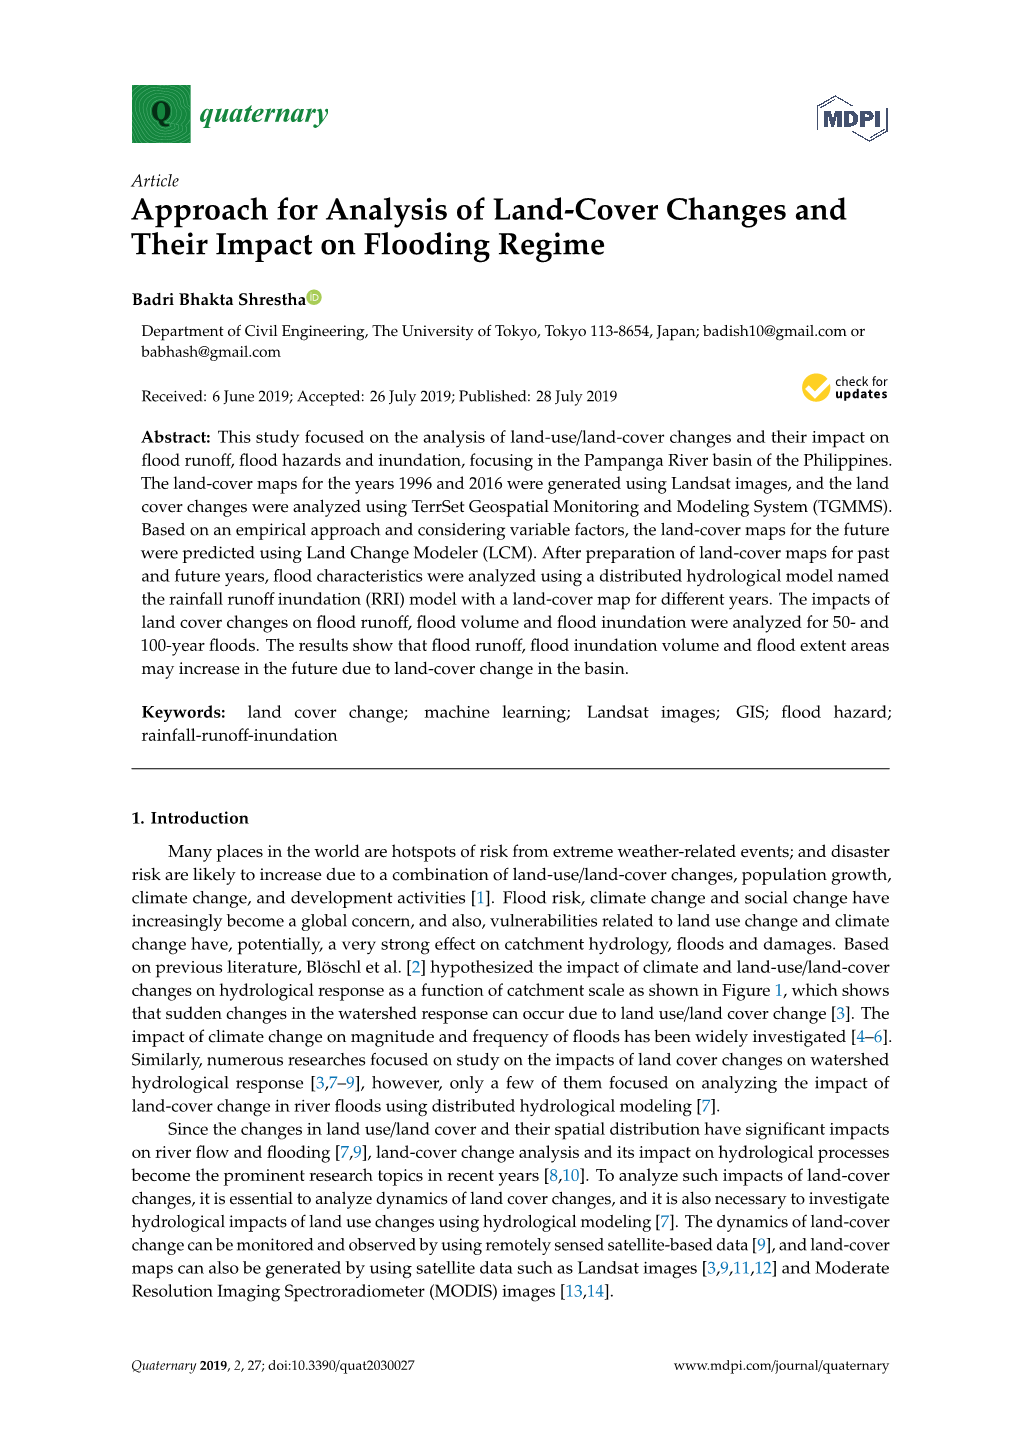 Approach for Analysis of Land-Cover Changes and Their Impact on Flooding Regime